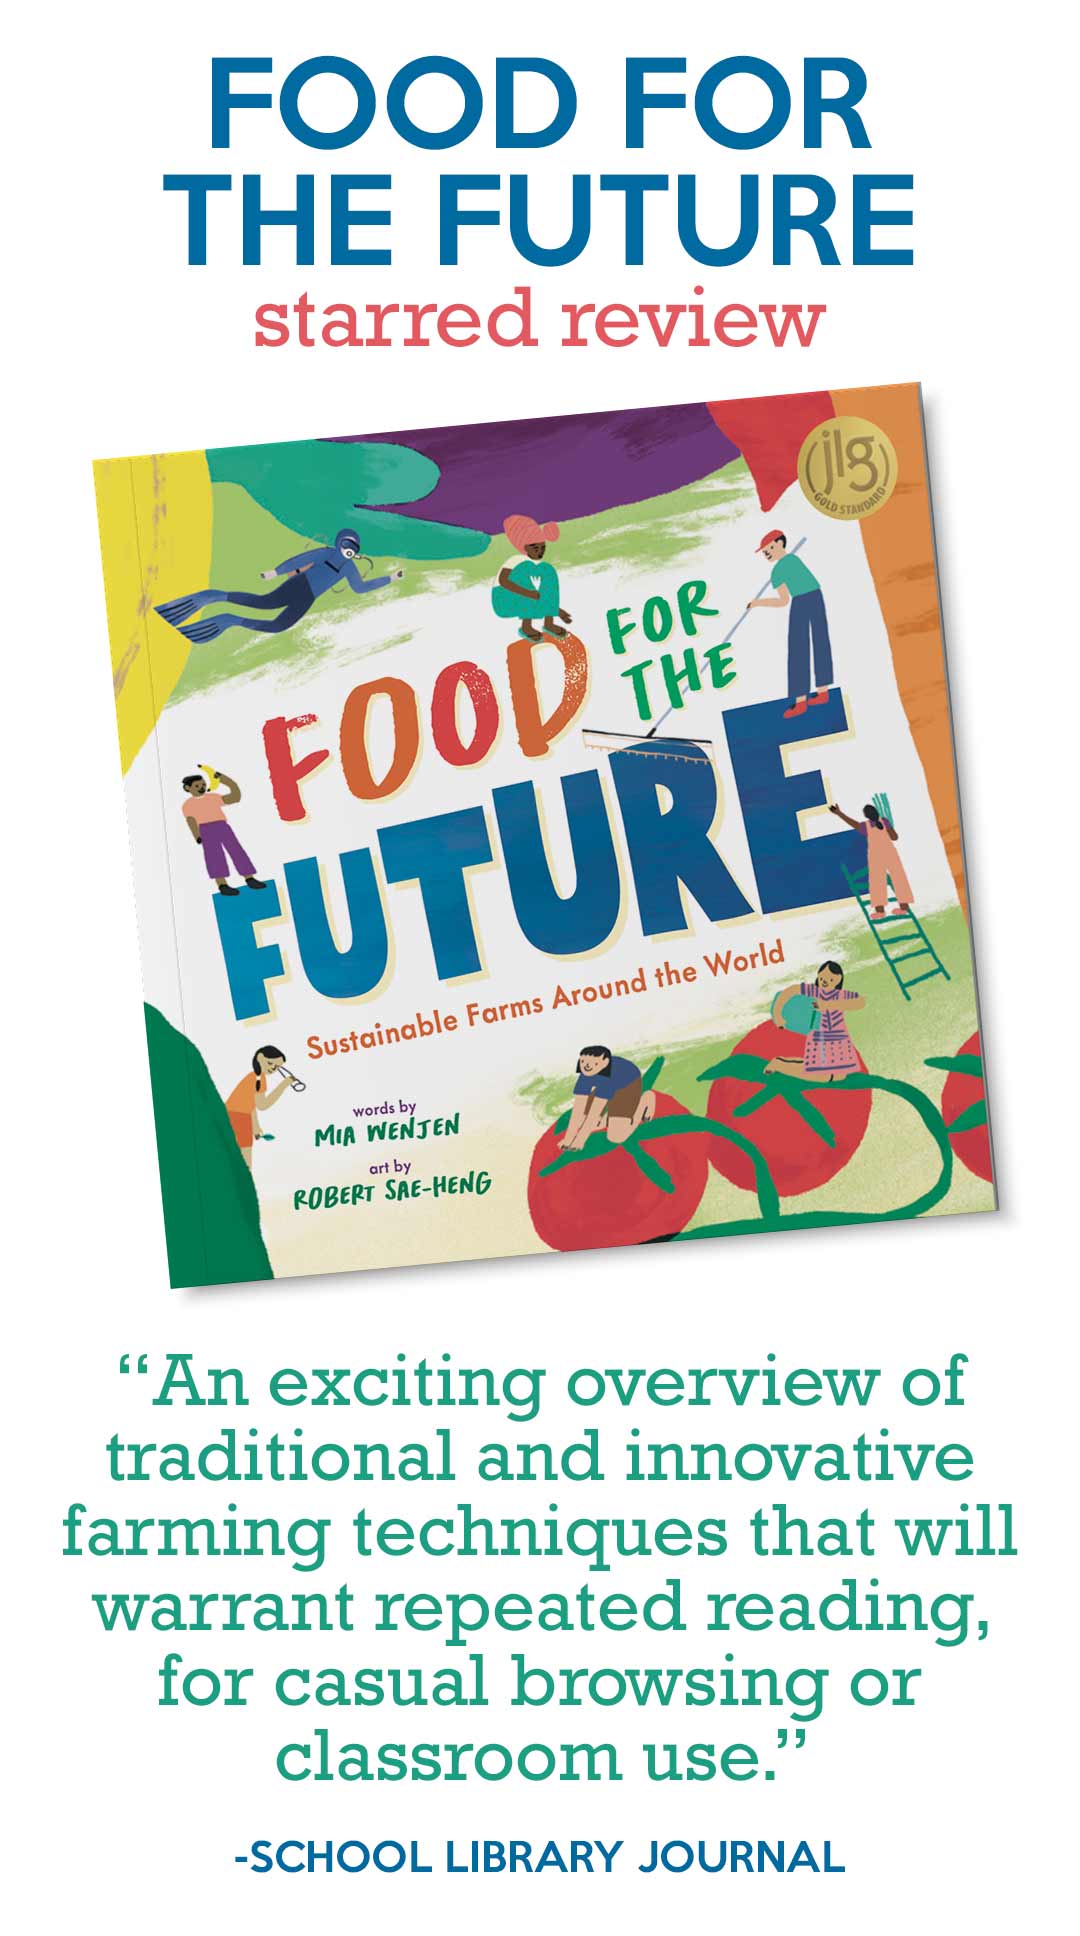 Food for the Future Star Review from School Library Journal